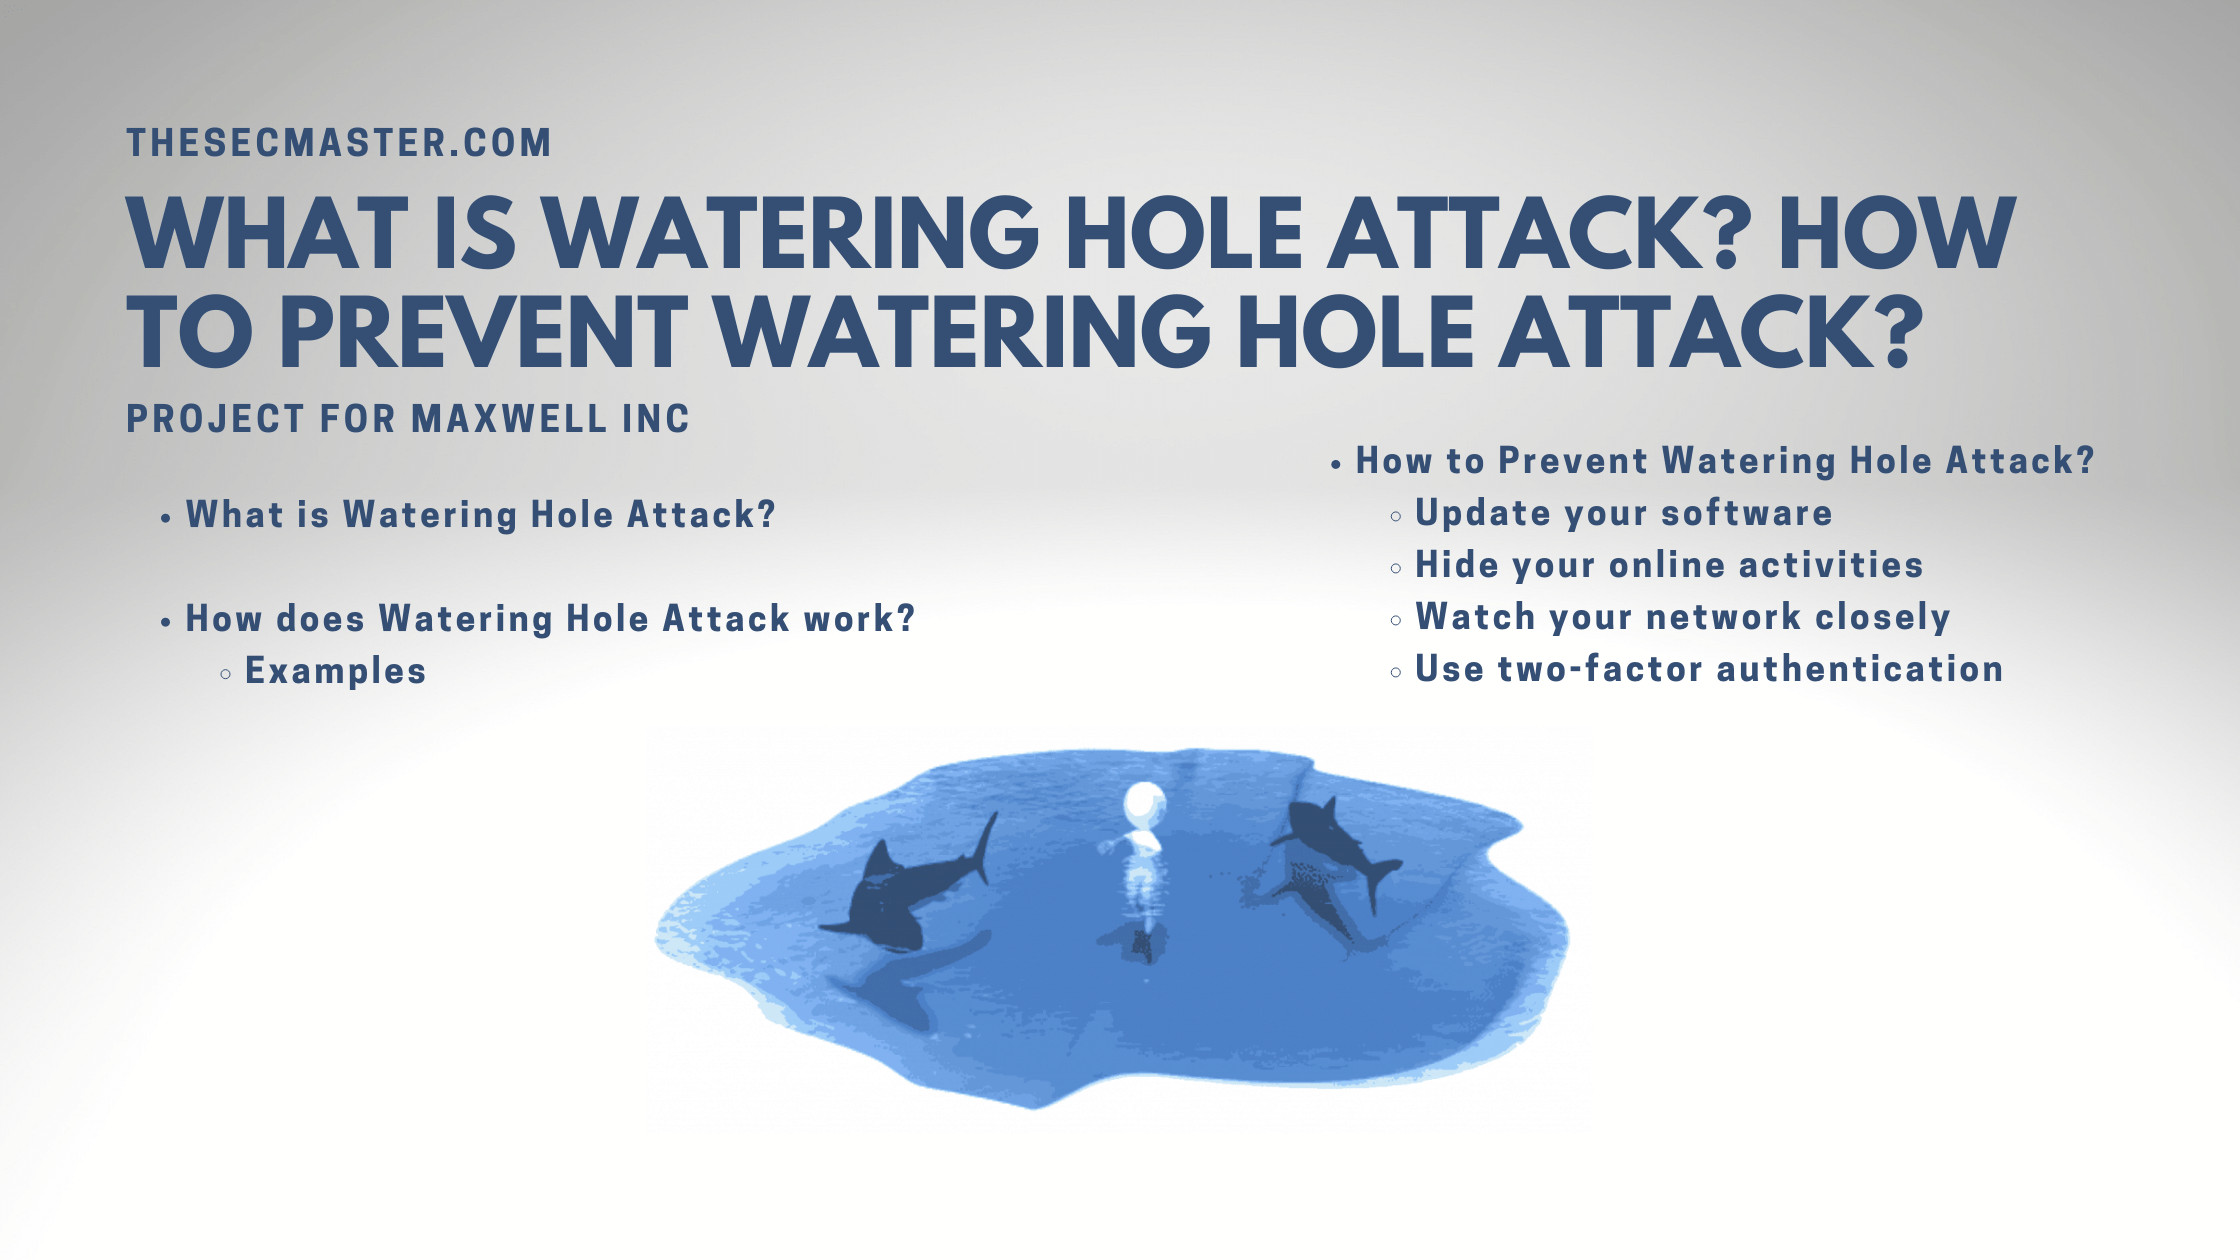 Watering hole attack